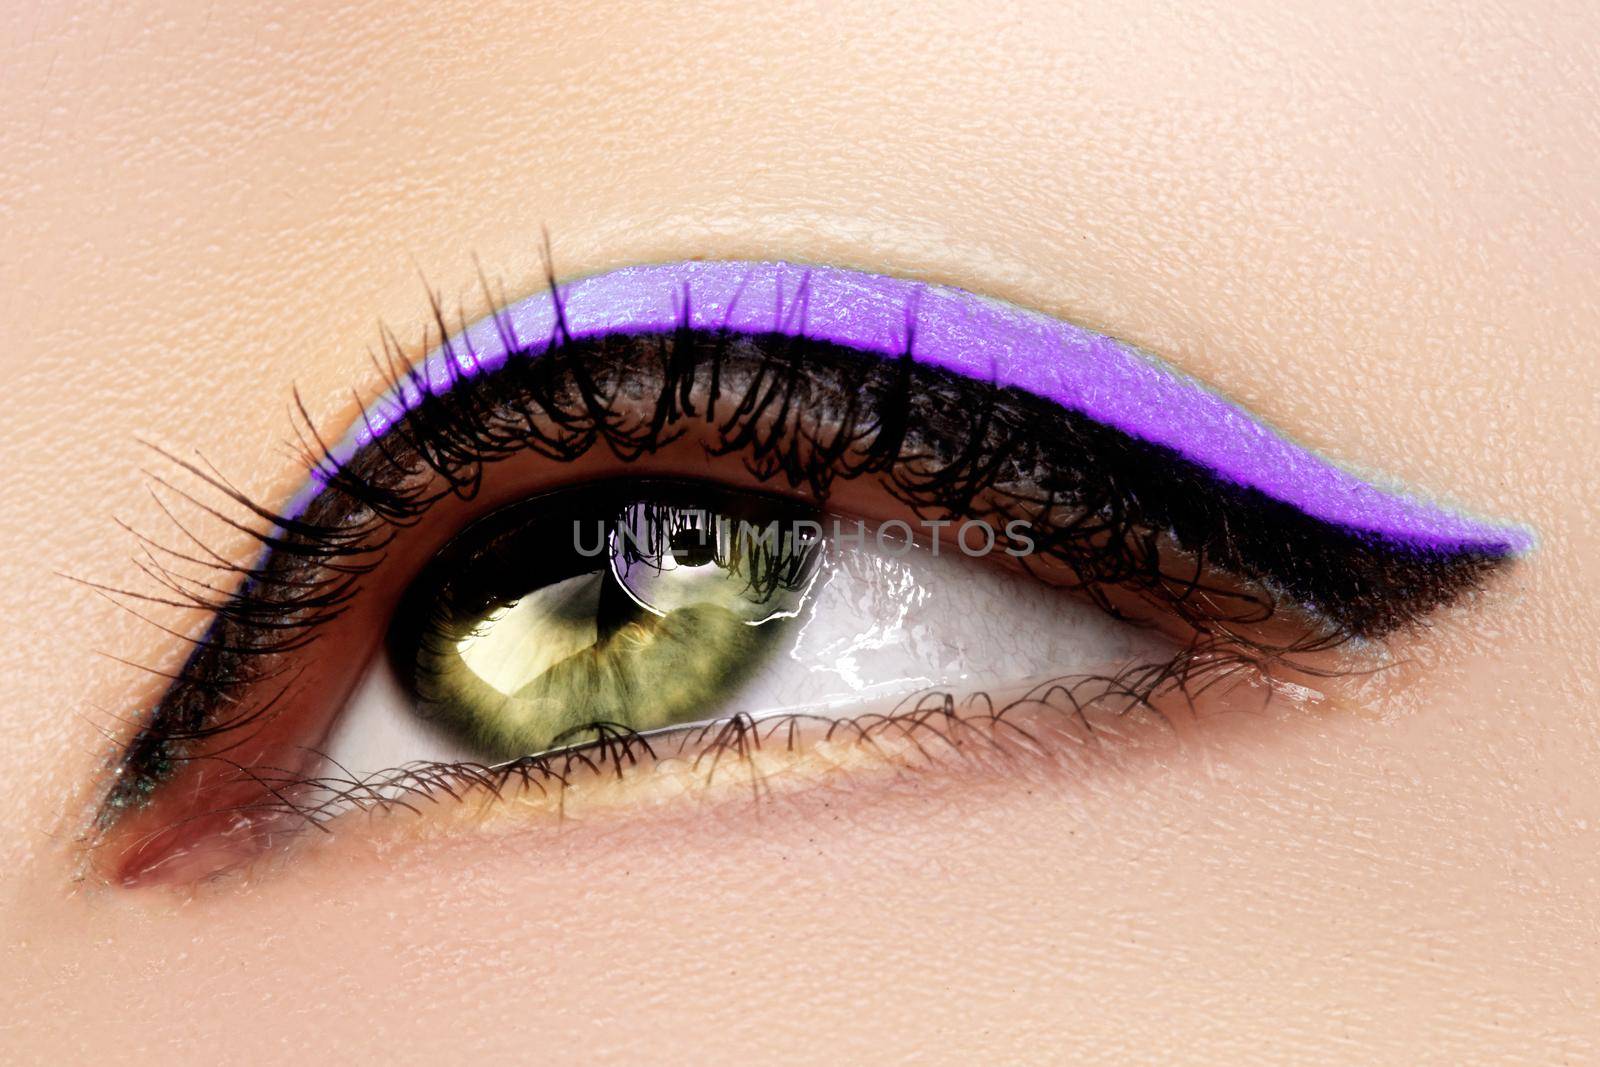 Beautiful Macro Shot of Female Green Eye with Makeup. Perfect Shape of Eyebrows, Purple Eyeliner. Cosmetics and Make-up by MarinaFrost